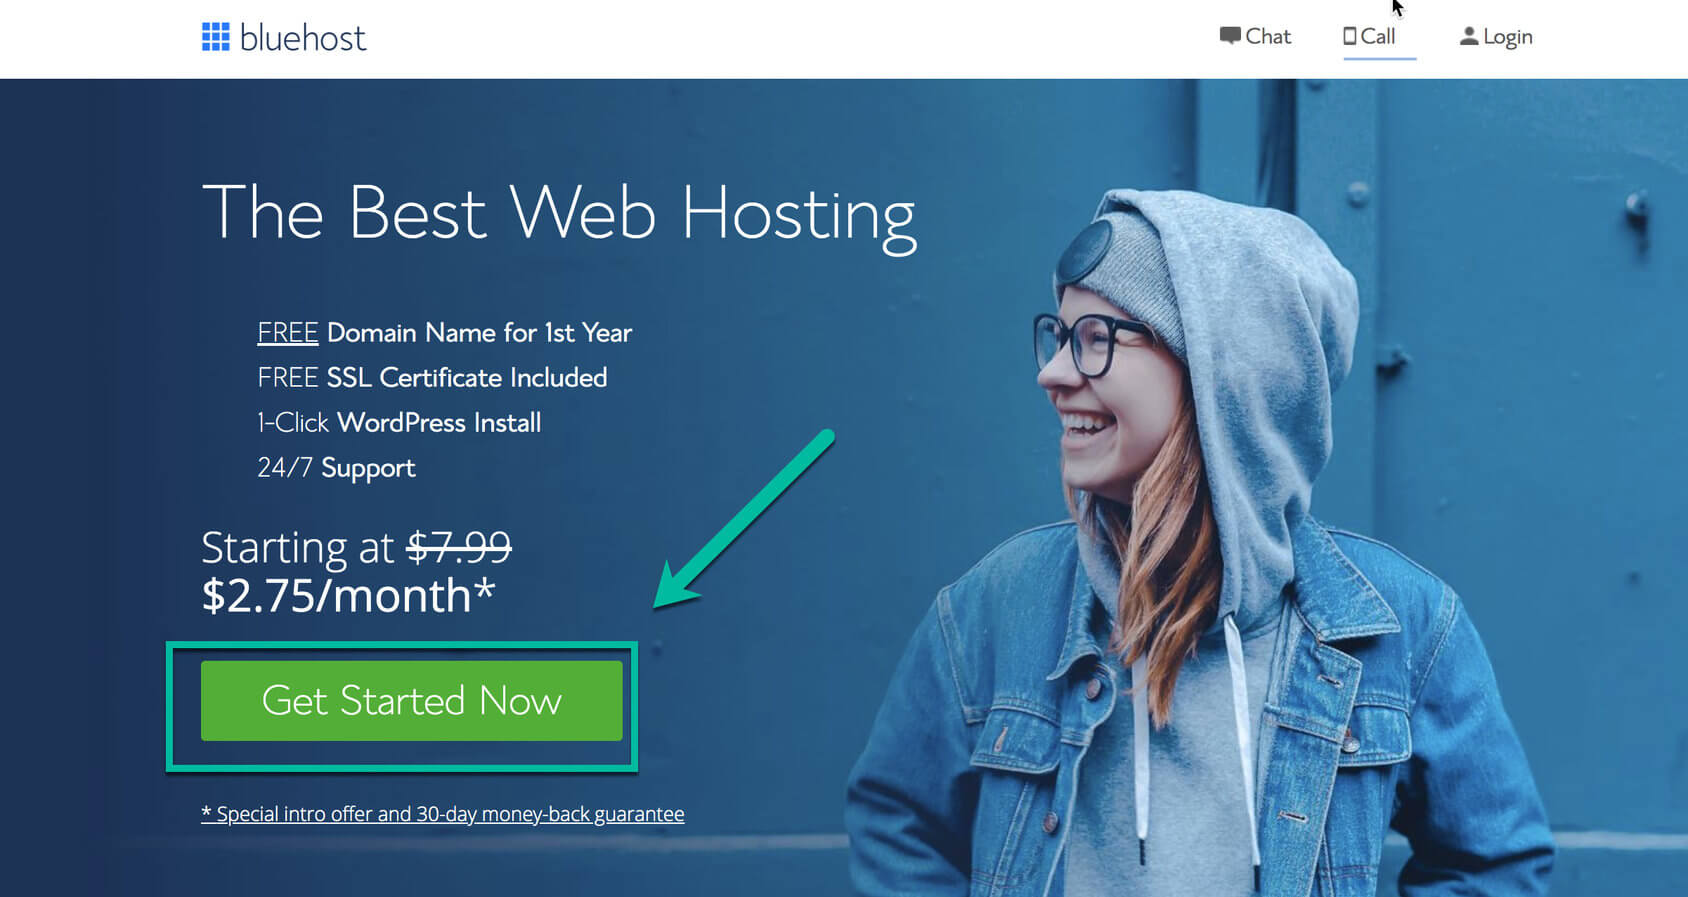 bluehost get started button